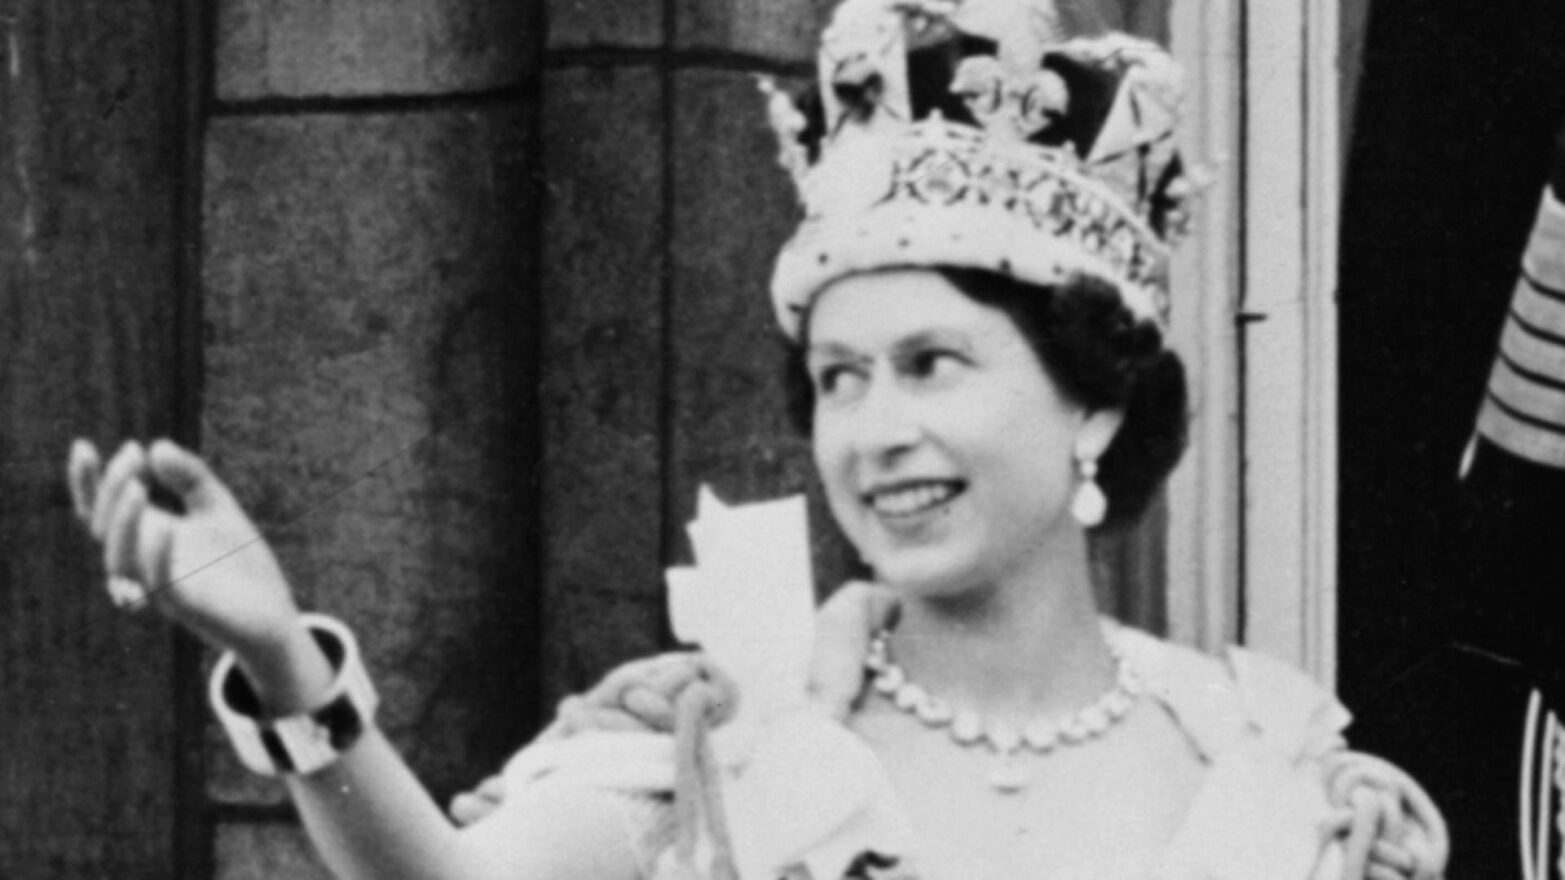 Image of a young Queen Elizabeth II from the PBS documentary "In Their Own Words: Queen Elizabeth II"